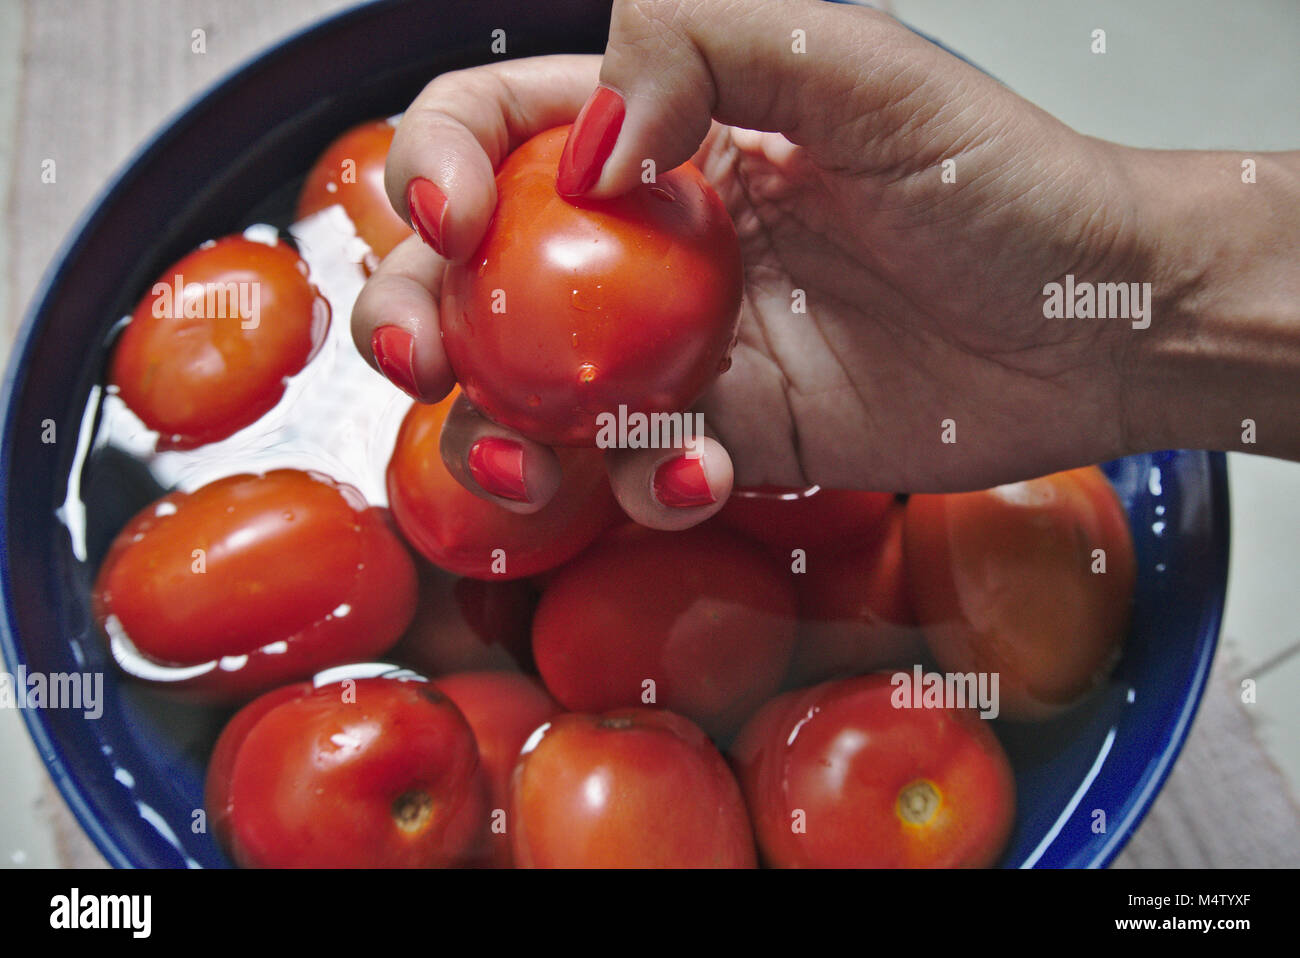 Woman selecting roma tomatoes from water and showing the hand with beautiful red nails. Stock Photo